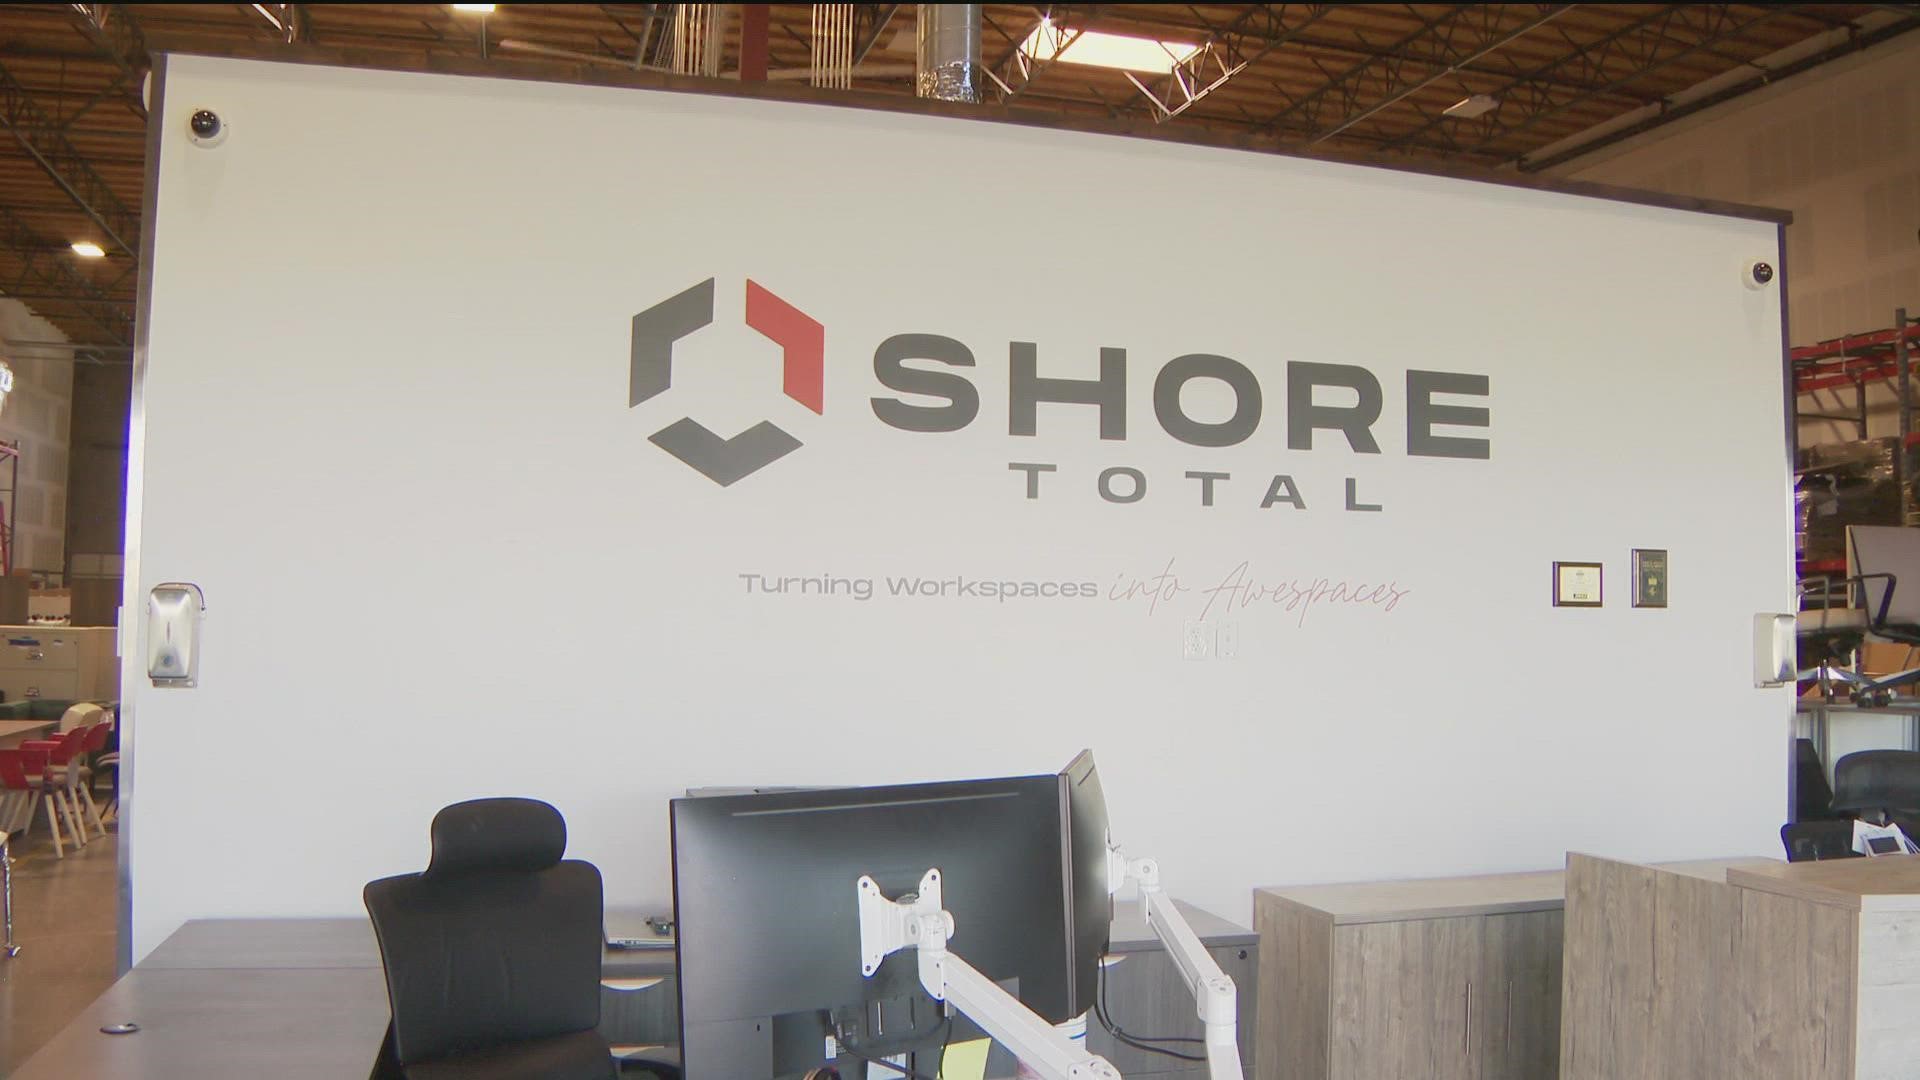 It's a family-owned company that sells office furniture. They have two locations -- in Scripps Ranch and Chula Vista.